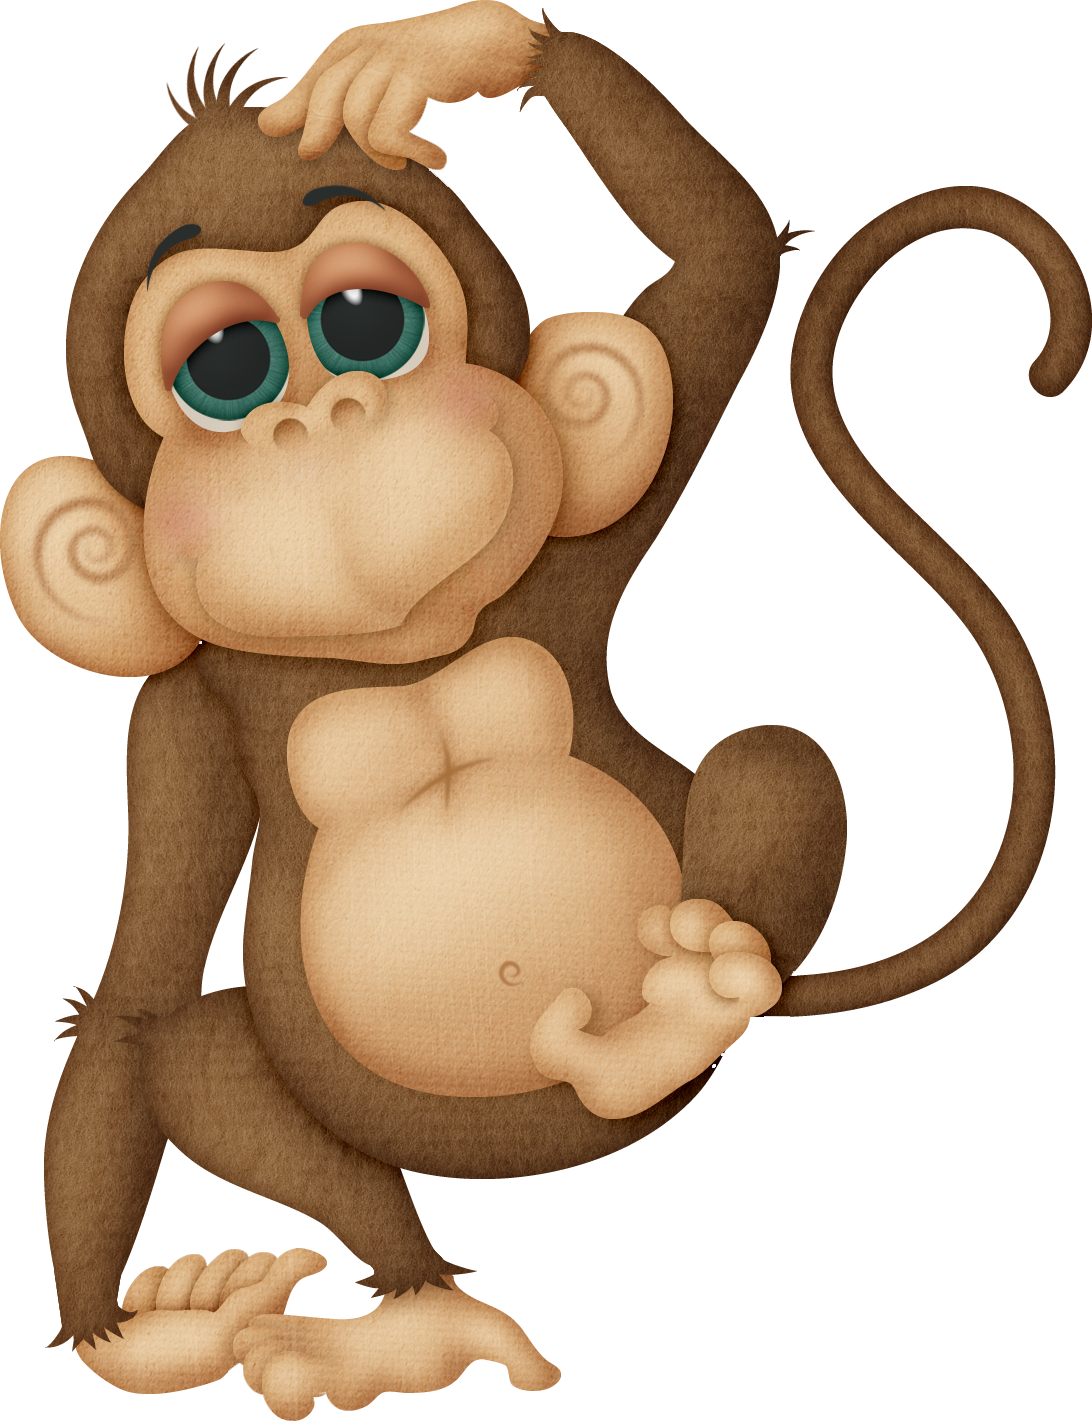 Monkey PNG images